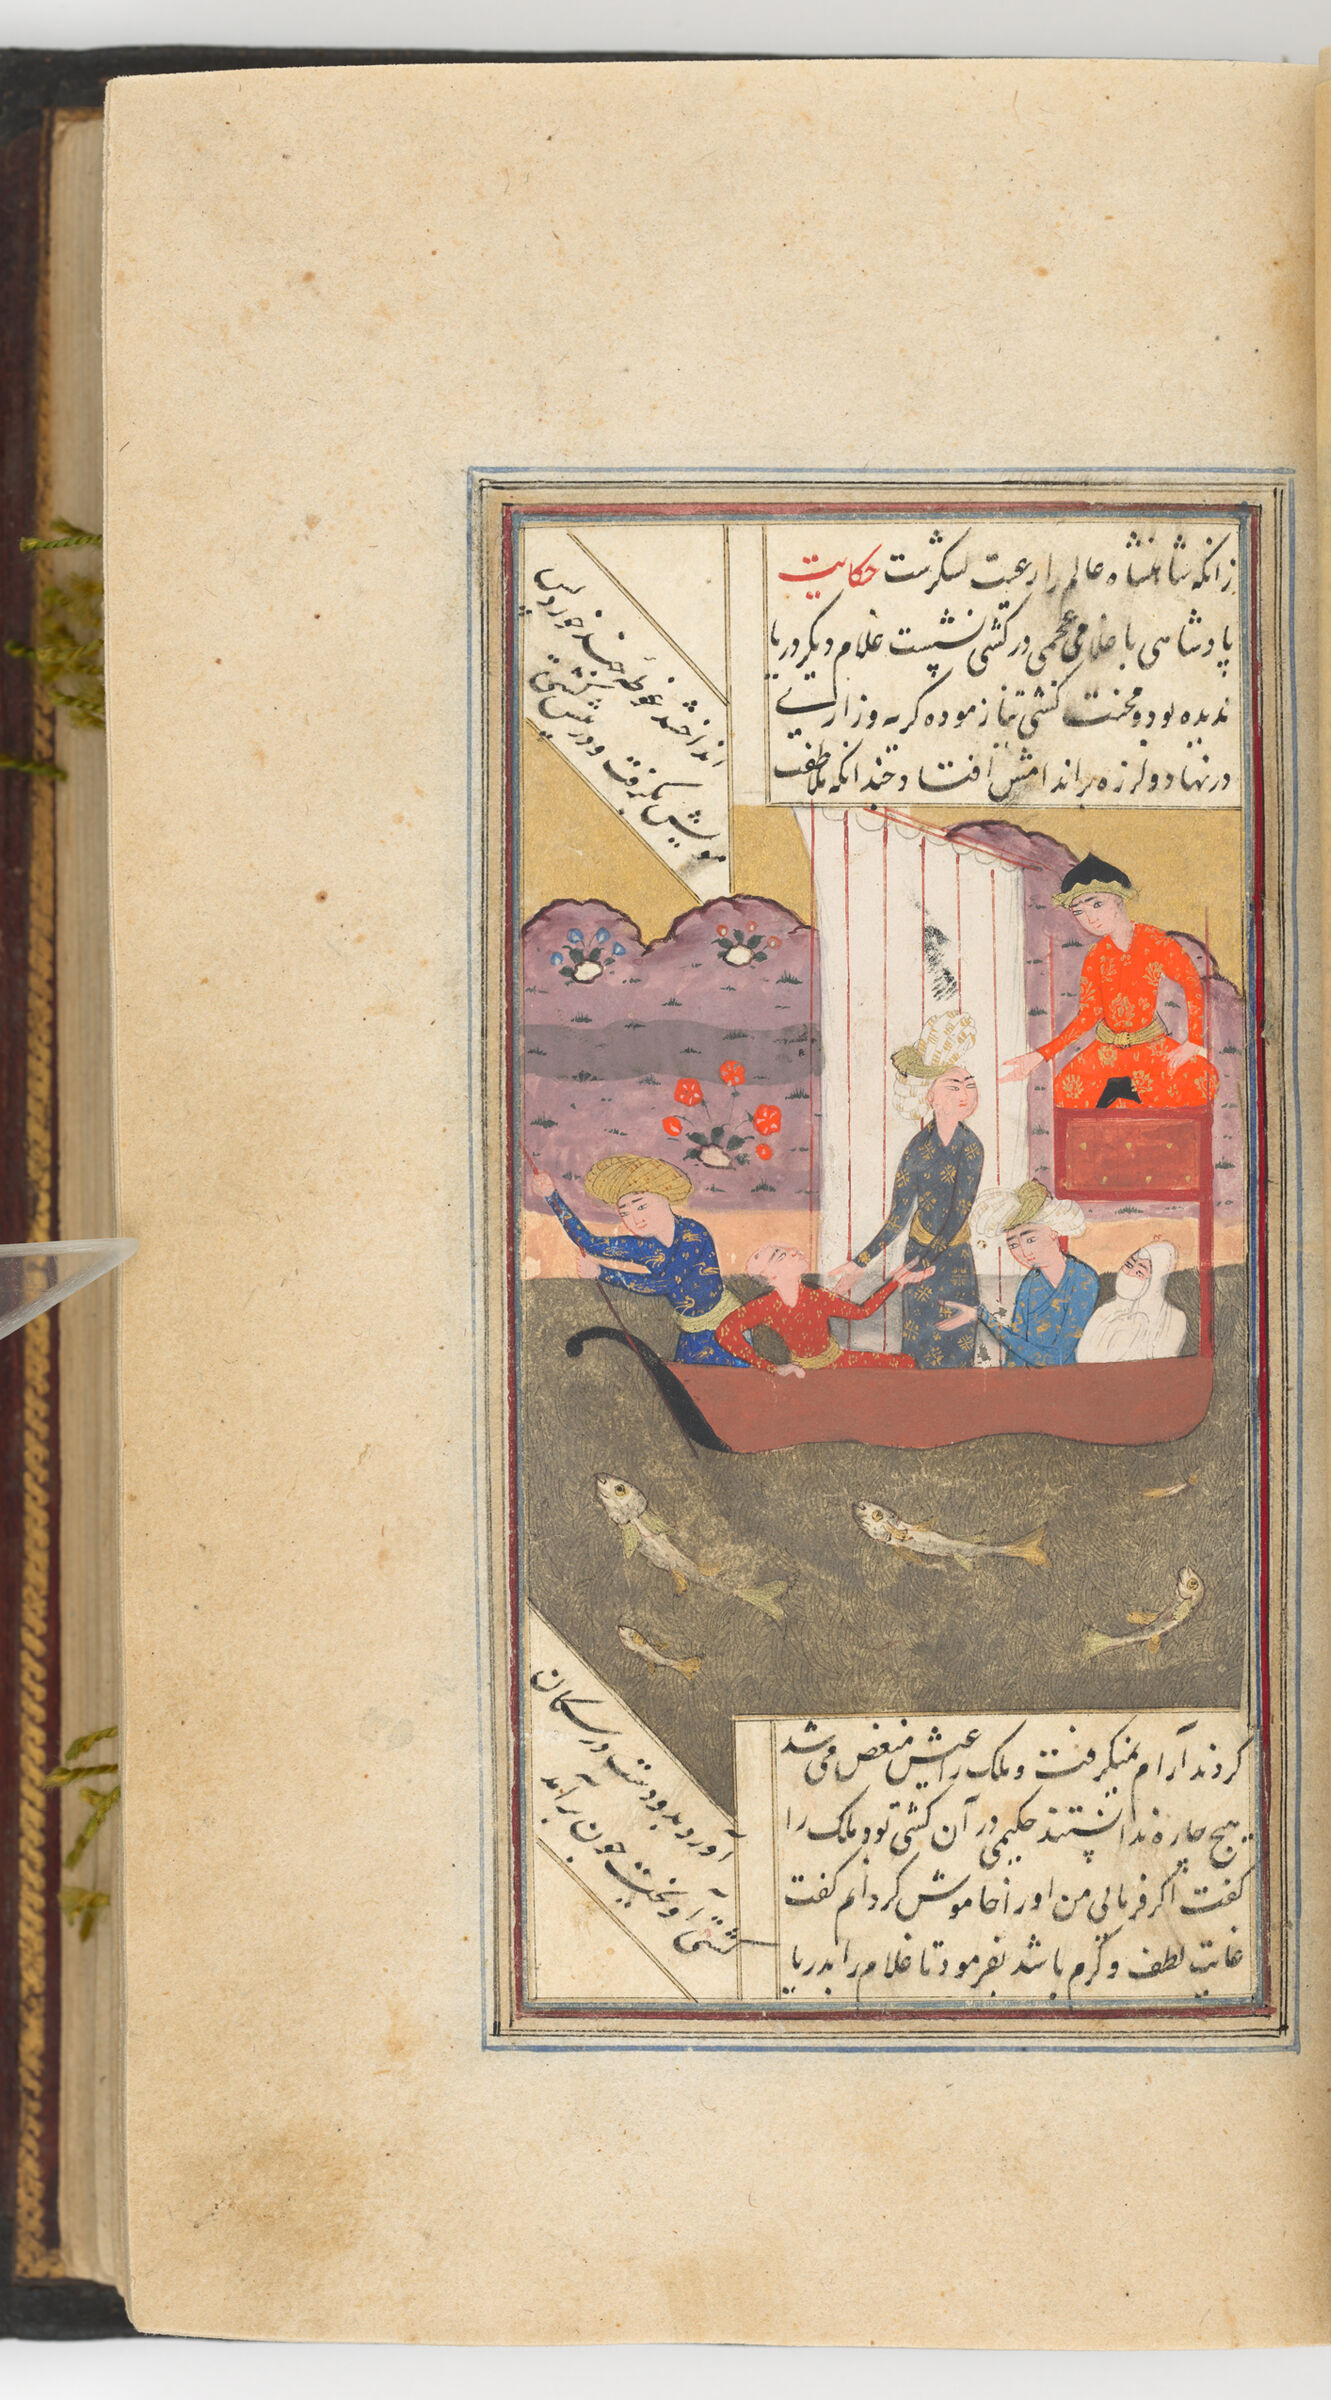 The Captain Throws The Slave Into The Sea (Painting Recto; Text Verso Of Folio 41), Painting From A Manuscript Of The Kulliyat Of Sa‘di